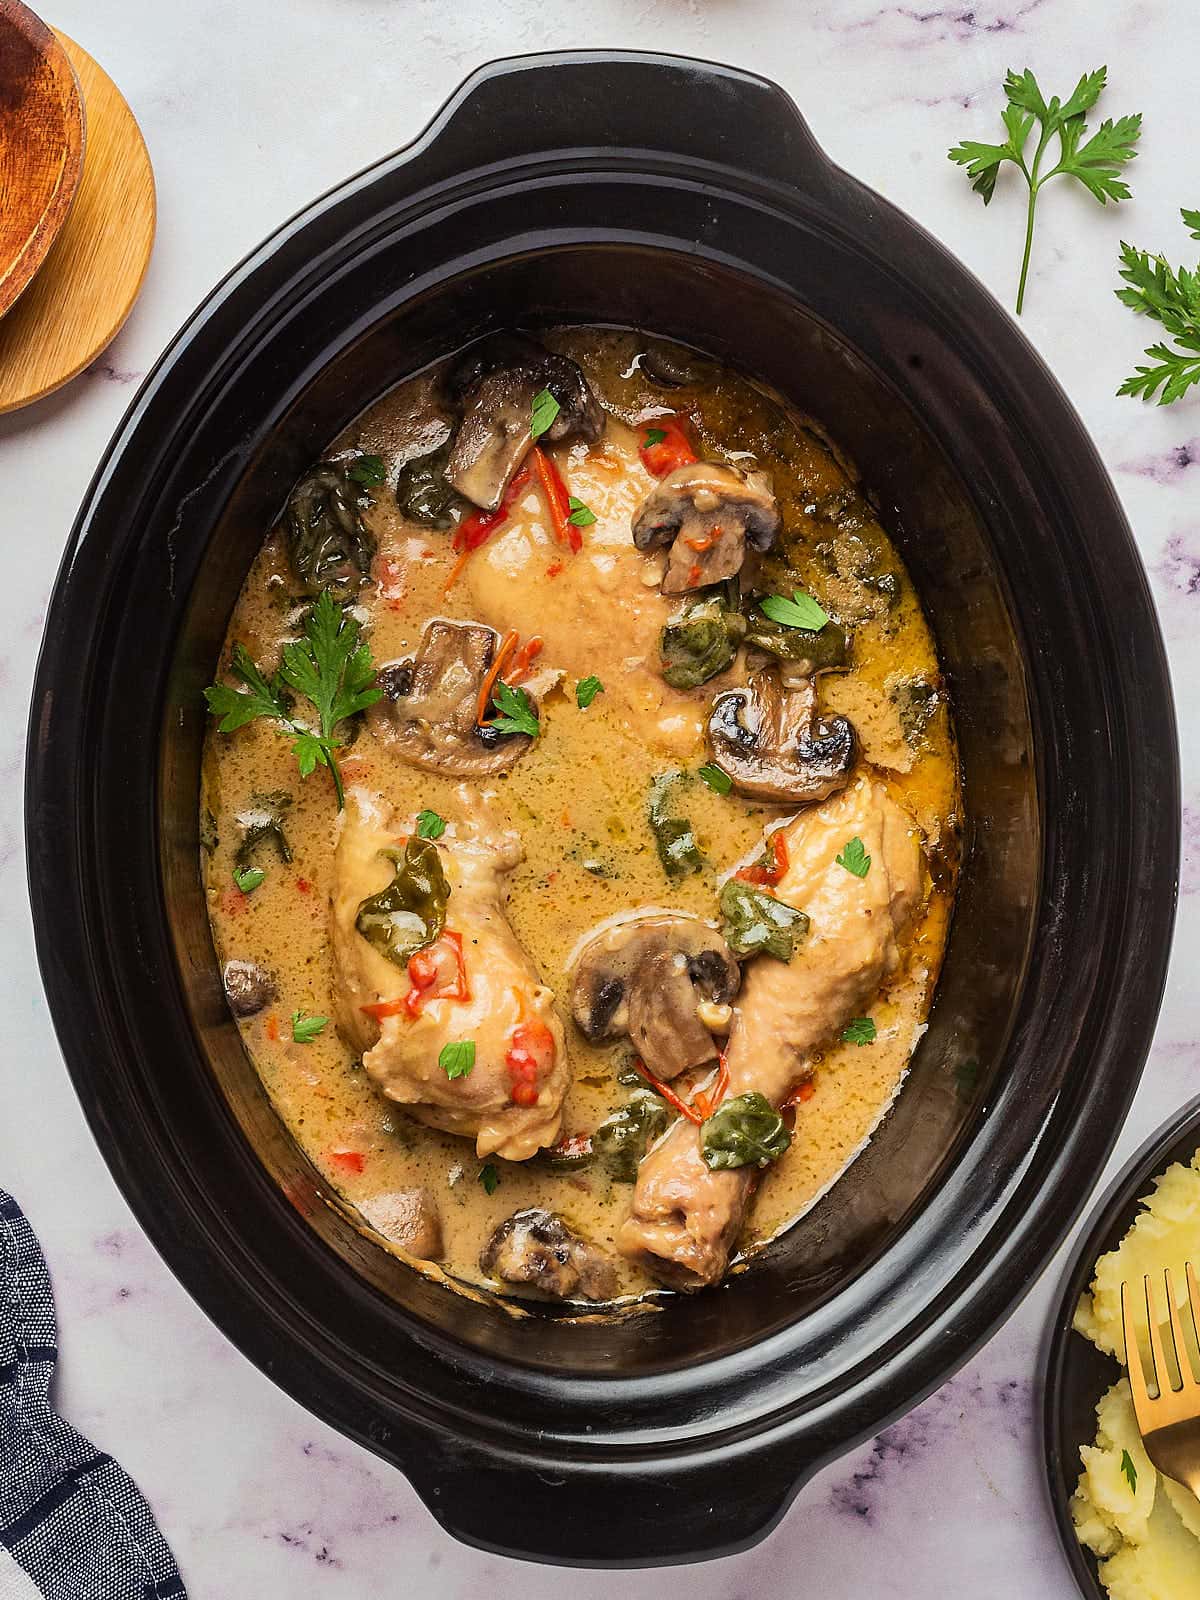 Top-down view of a Crock Pot with Creamy Chicken and Mushrooms. Mushrooms 